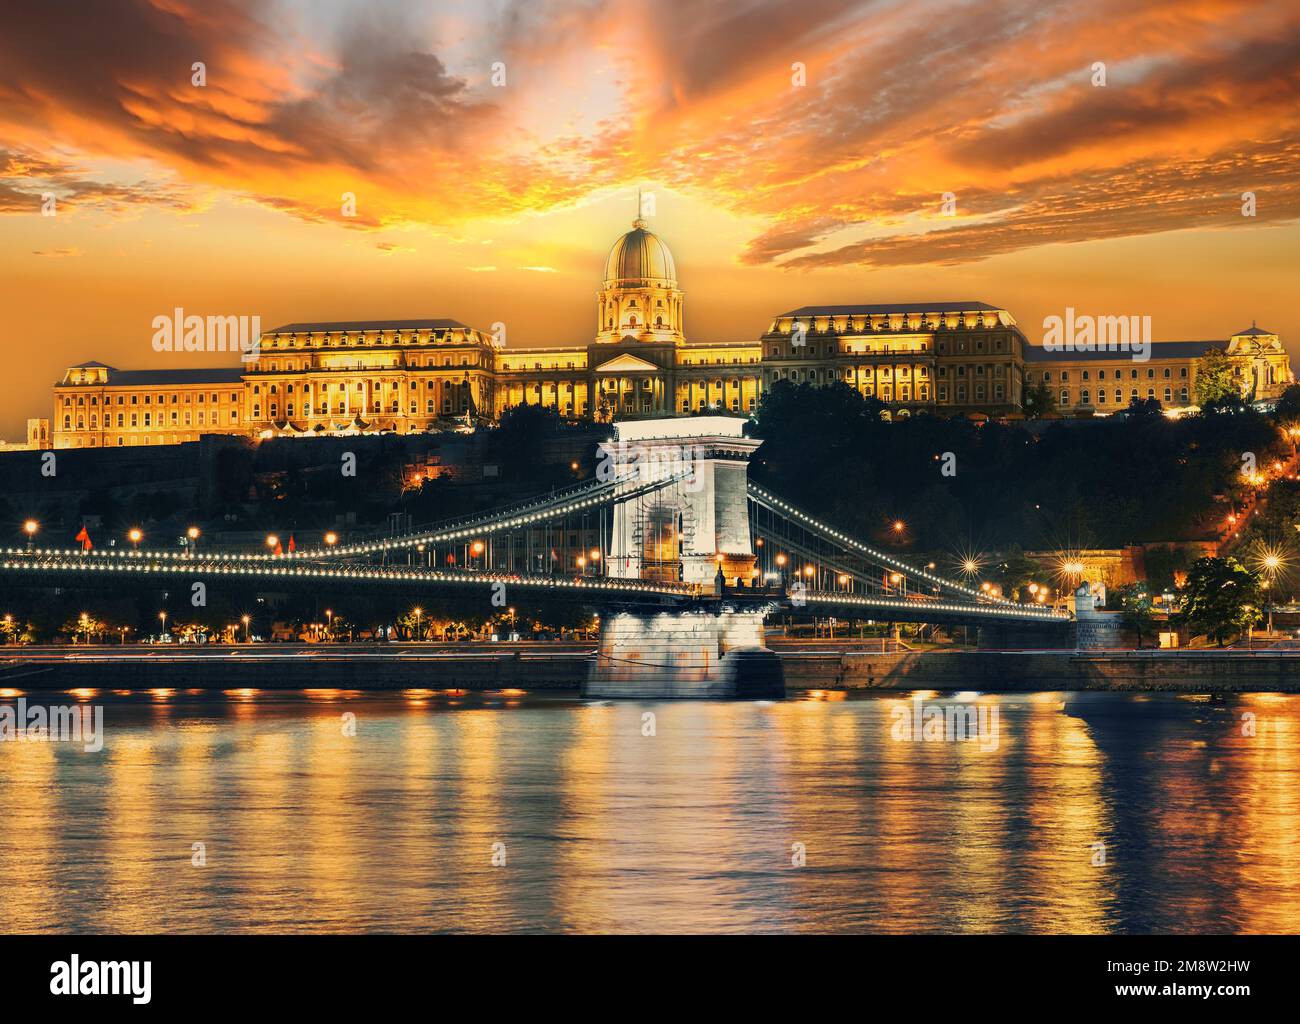 Picturesque view of Chain Bridge and Buda Castle (Royal Palace) in Budapest on the Danube river in the evening. Hungary. Stock Photo